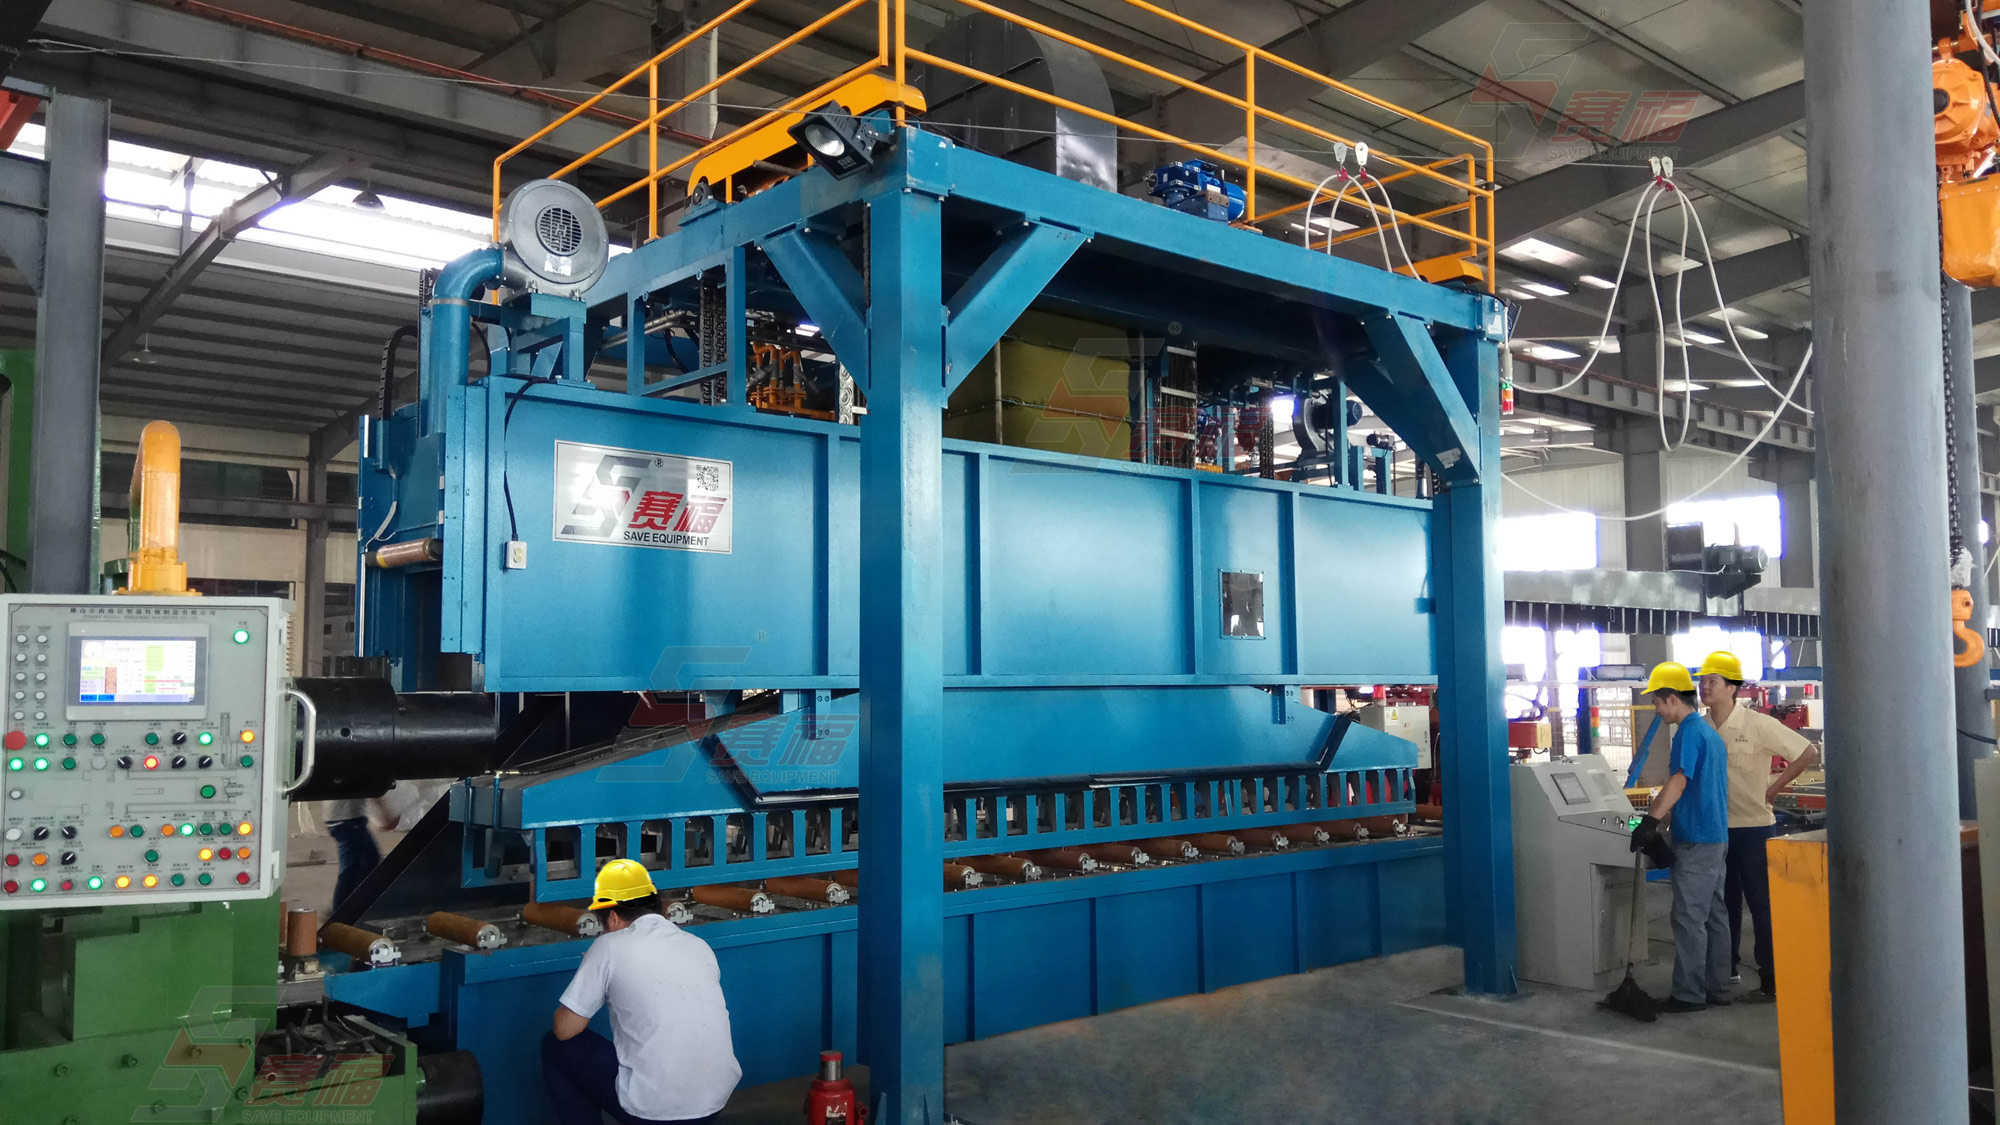 The installation and debugging of quenching system on procedure for Zhejiang Mihuang aluminum industry